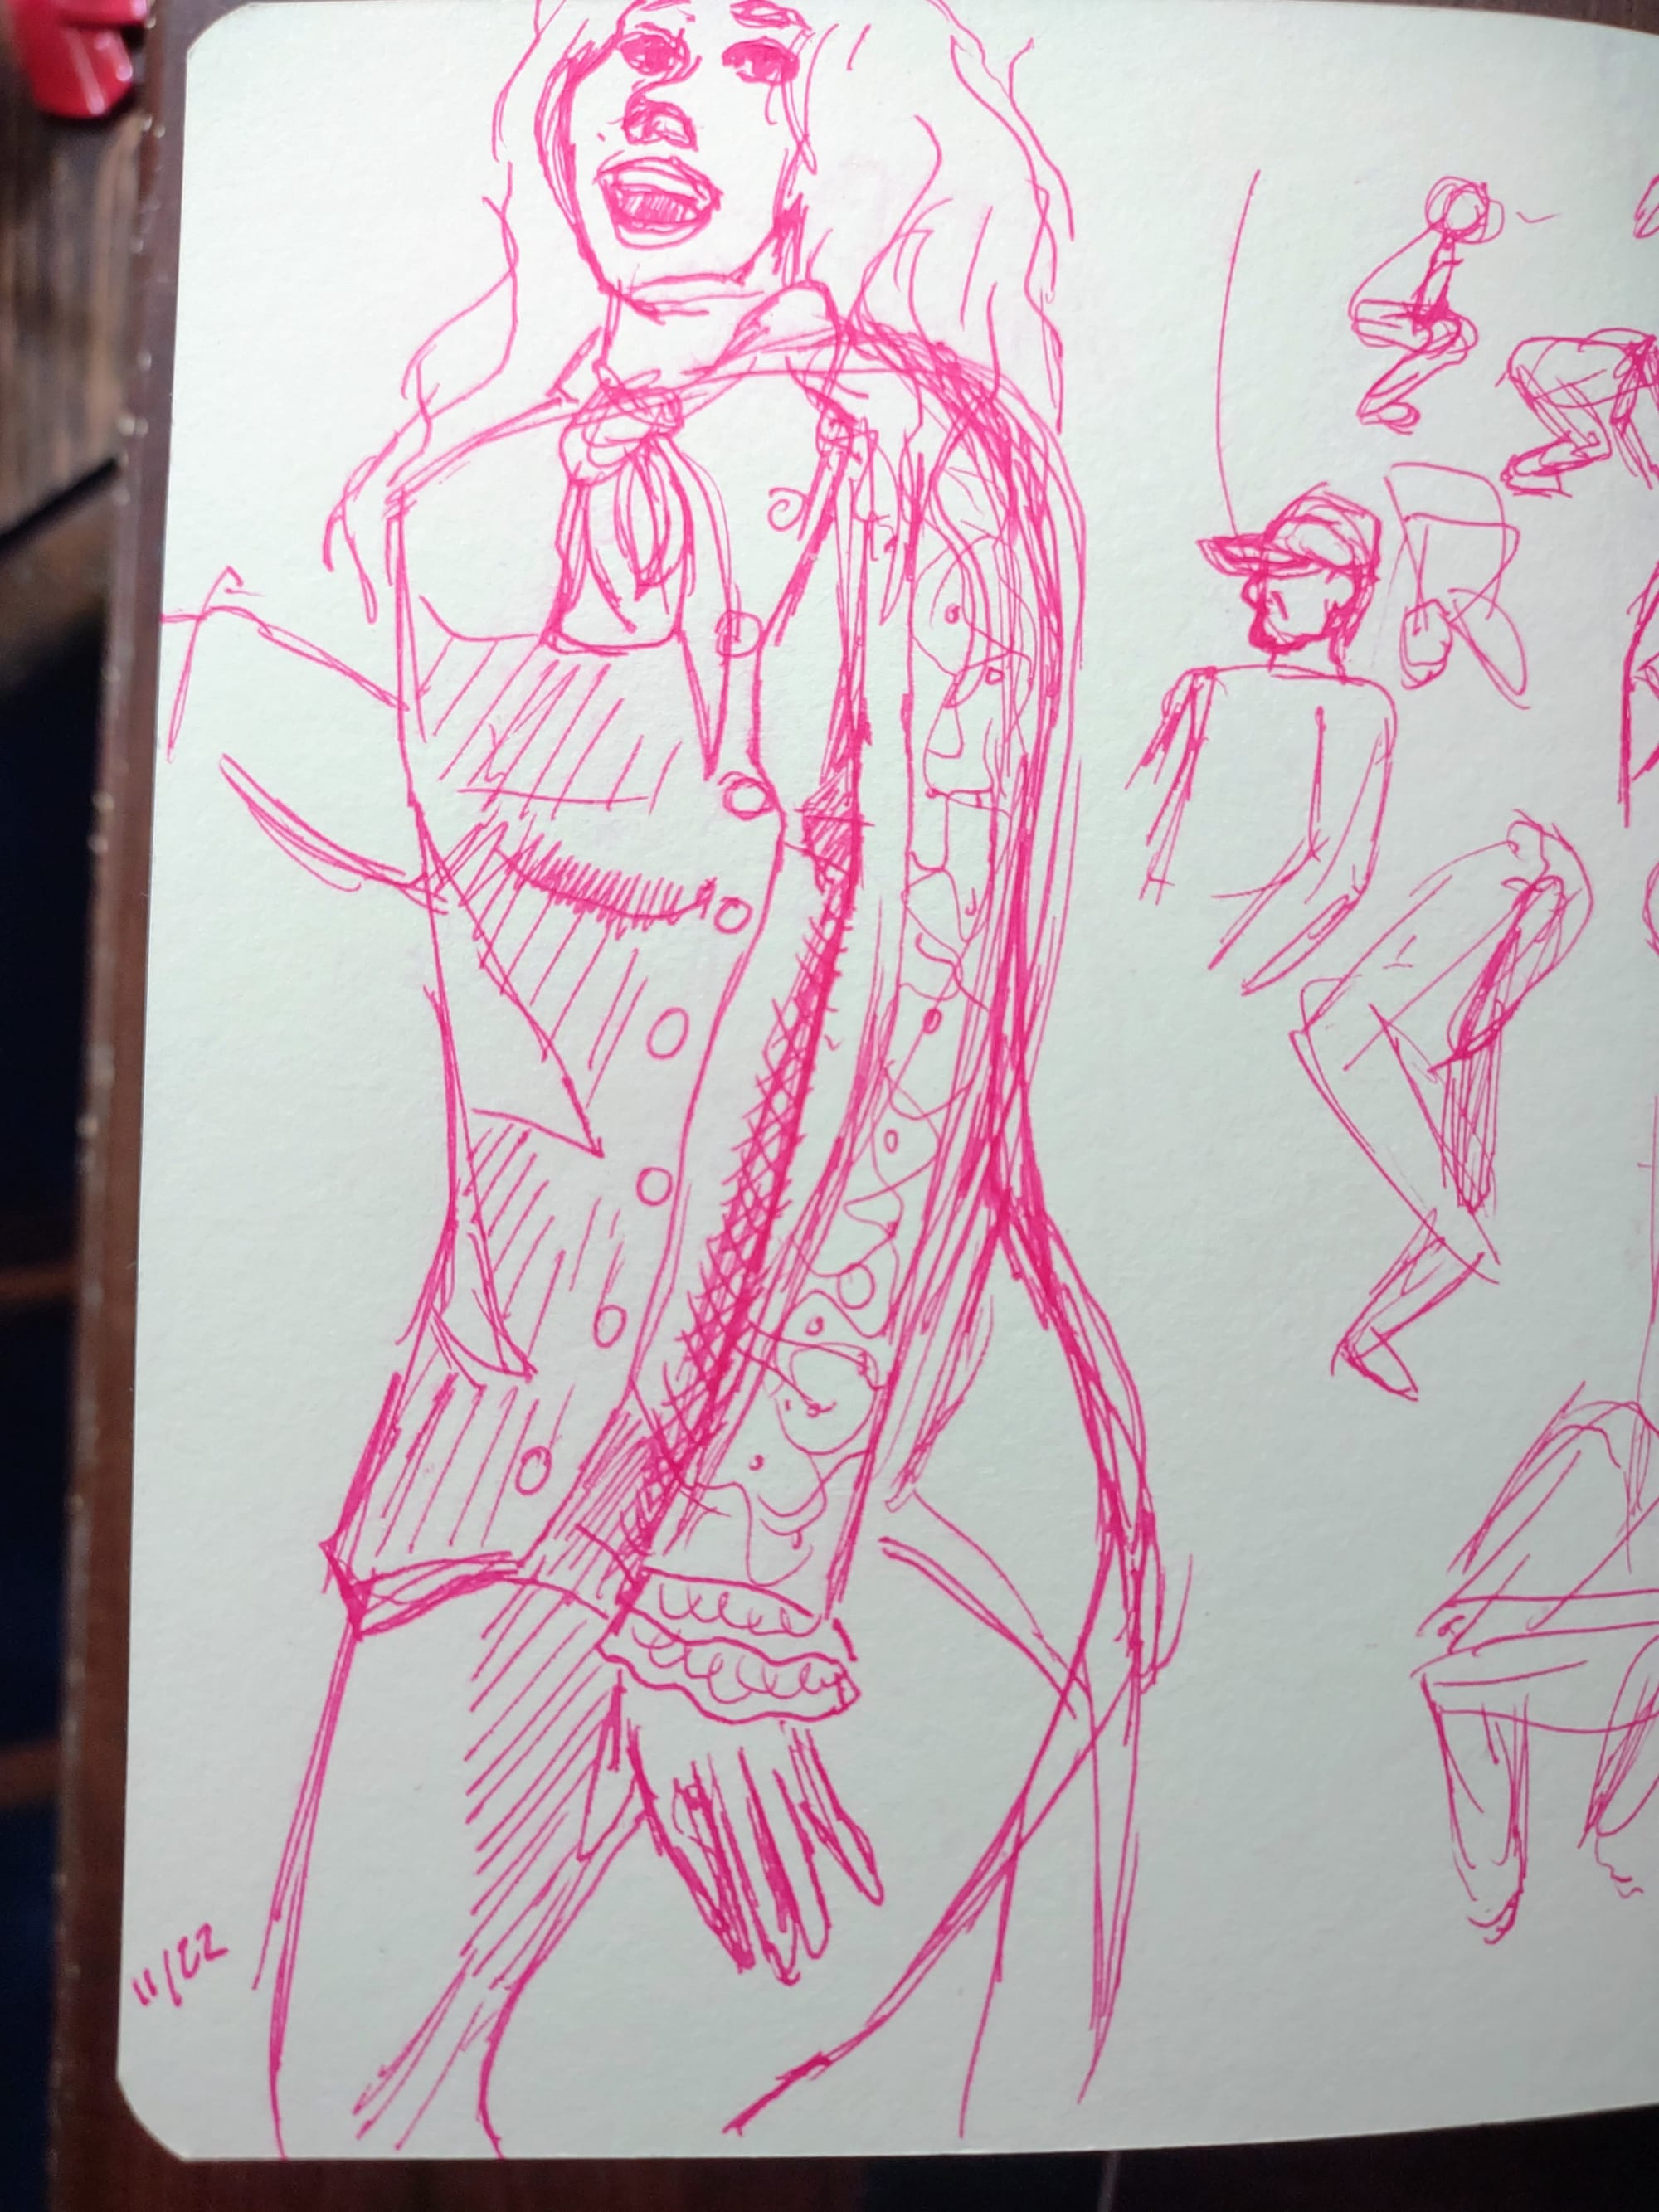 A sketchbook page with line drawings in pink ink, showing a wavy-haired woman smiling in a long buttoned jacket. Next to that are some small gesture drawings of crouching figures and a bust of someone in a baseball cap. 